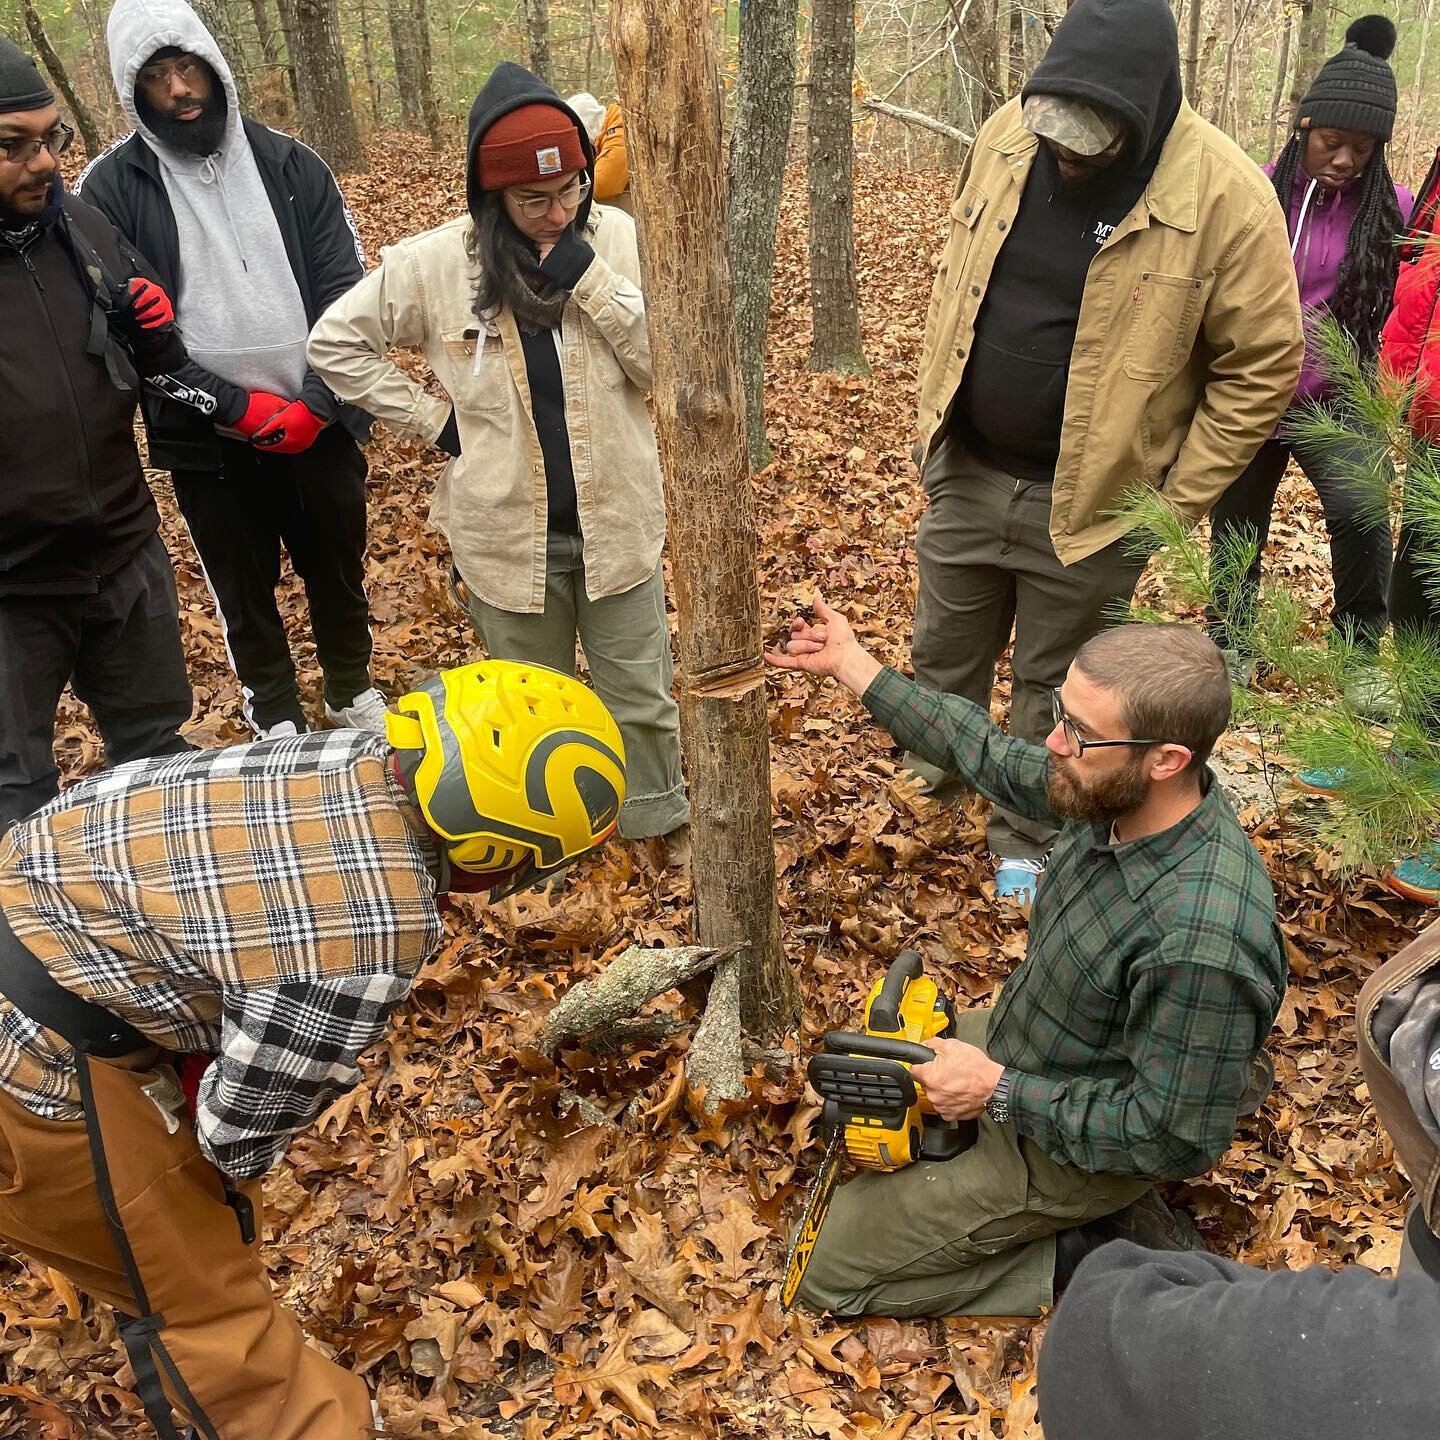 Eco-forestry example: sharing knowledge (and teaching hands-on skills) for sustainably harvesting a wood lot to promote biodiversity. This was a collaboration with the Adult Job Training class from Groundwork RI. Such a great team and group!